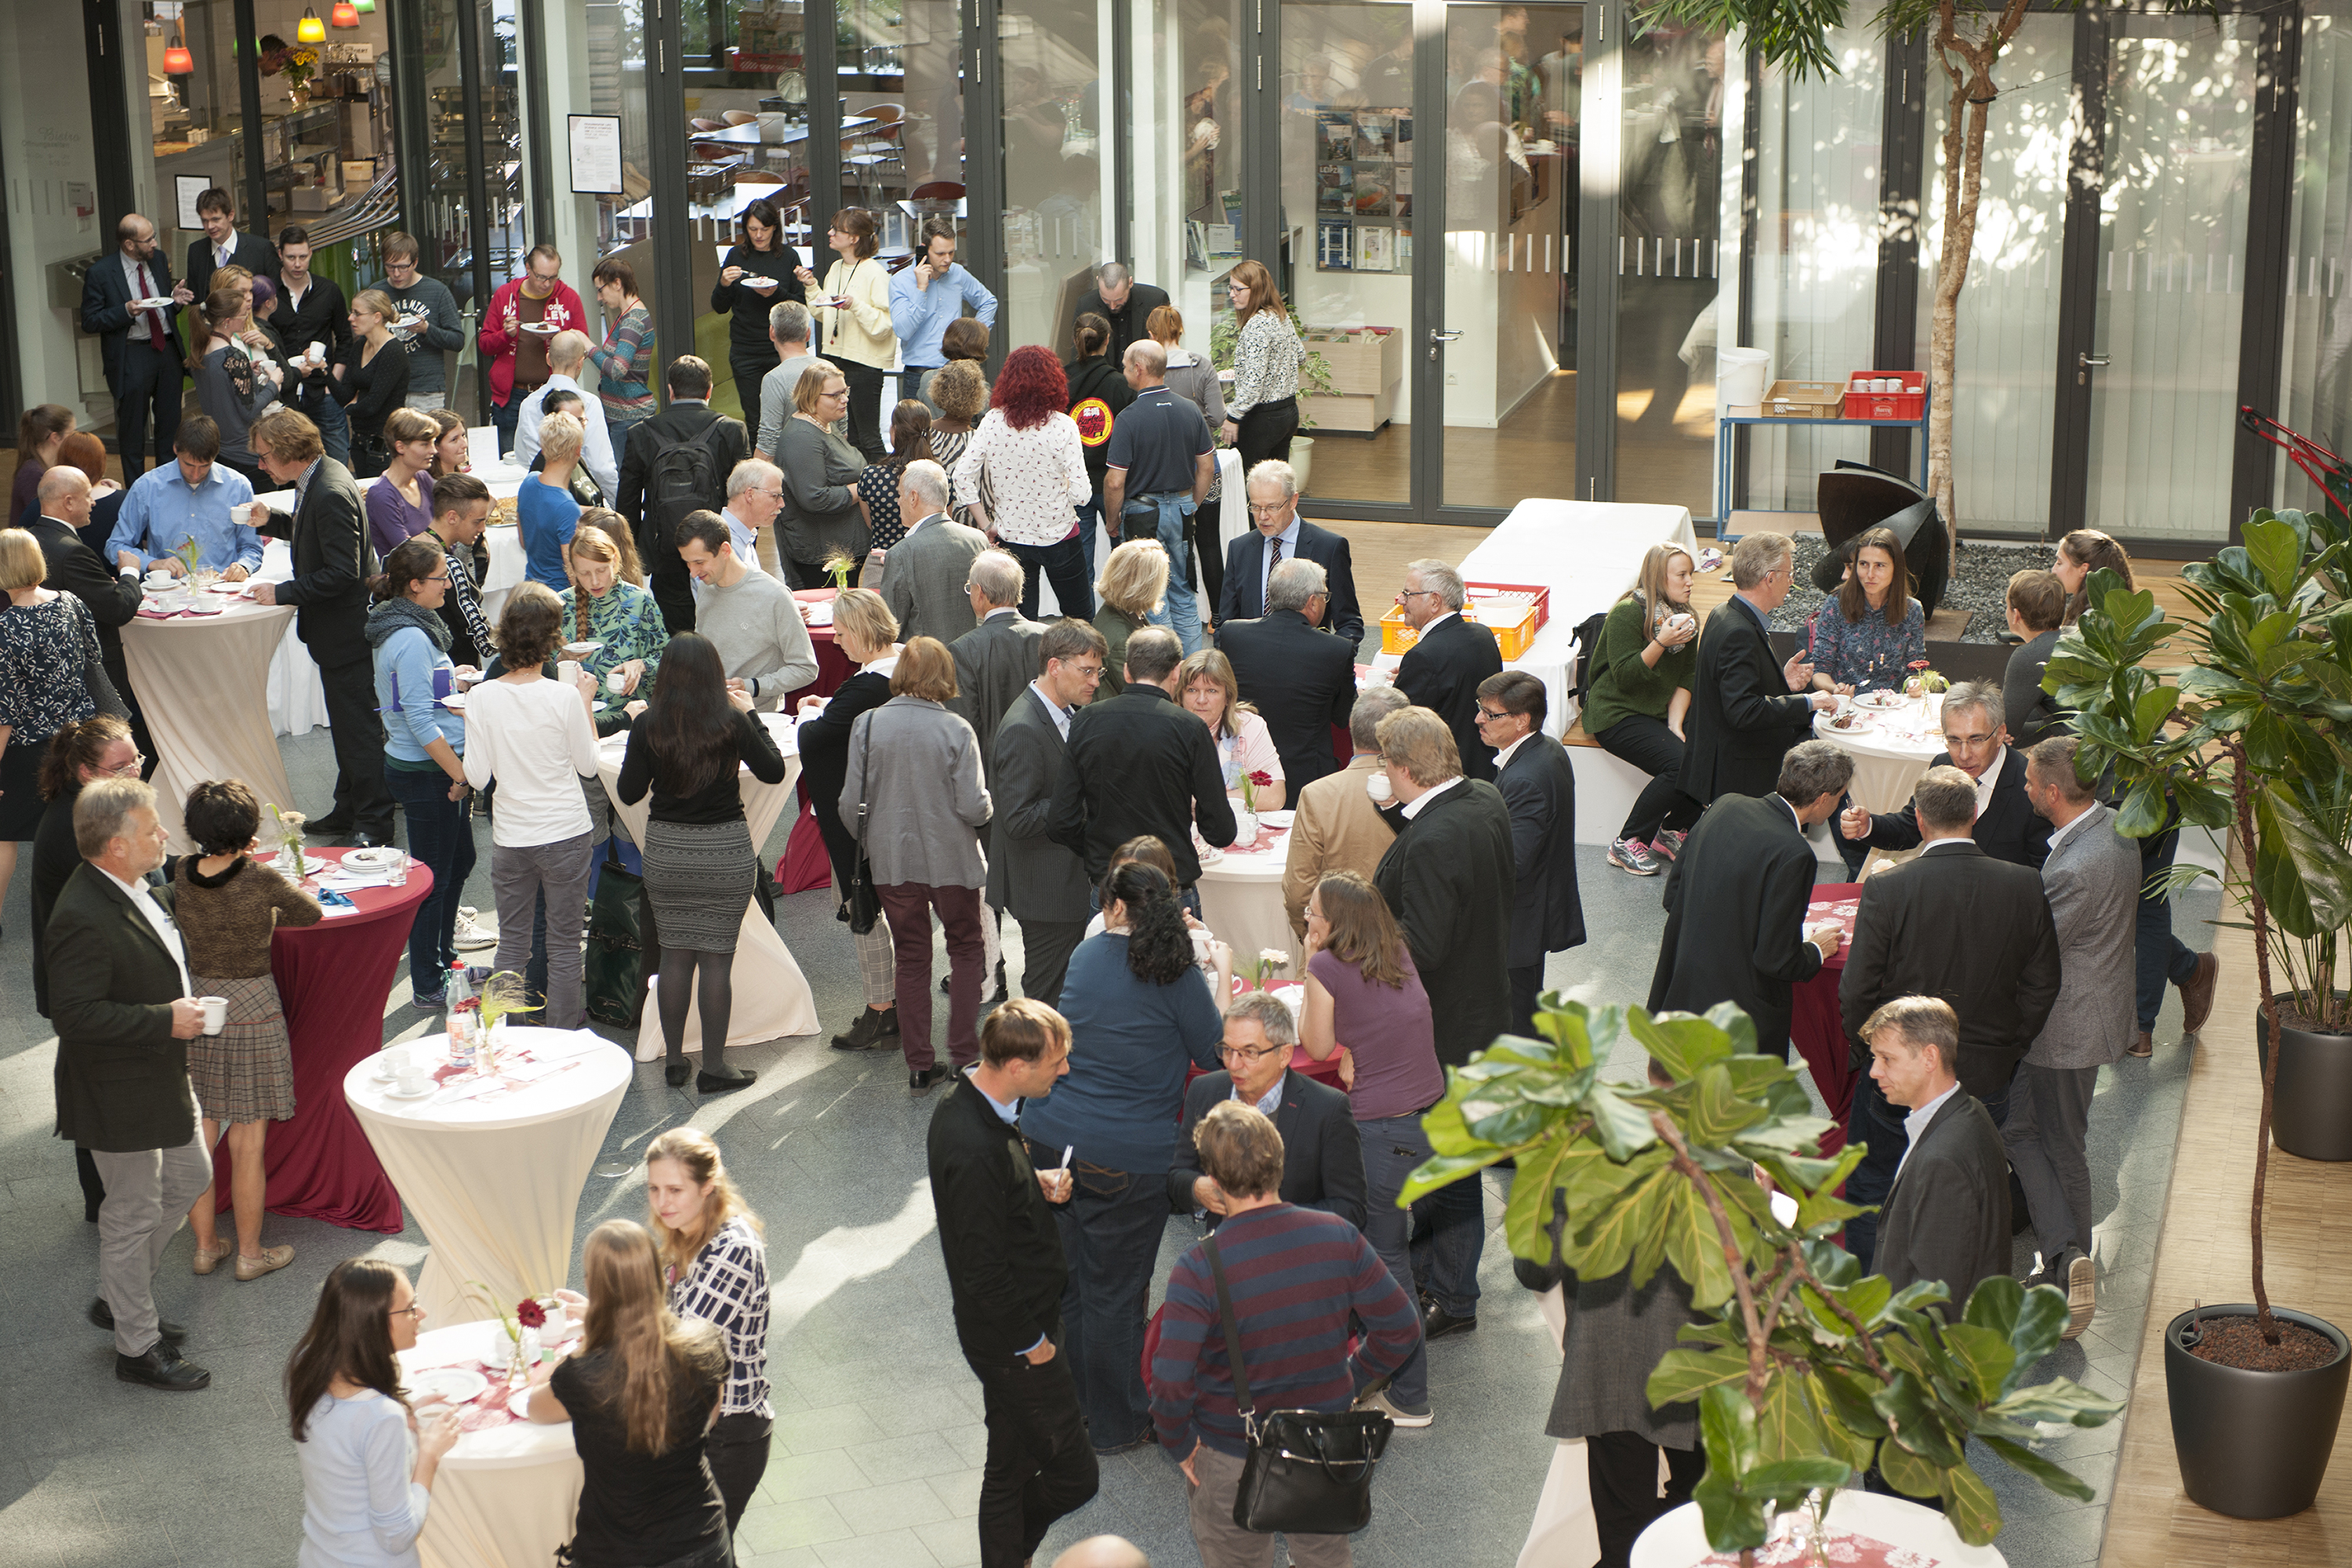 Around 150 guests attended the Fraunhofer Life Science Symposium on 27 September 2018 at the Fraunhofer IZI.